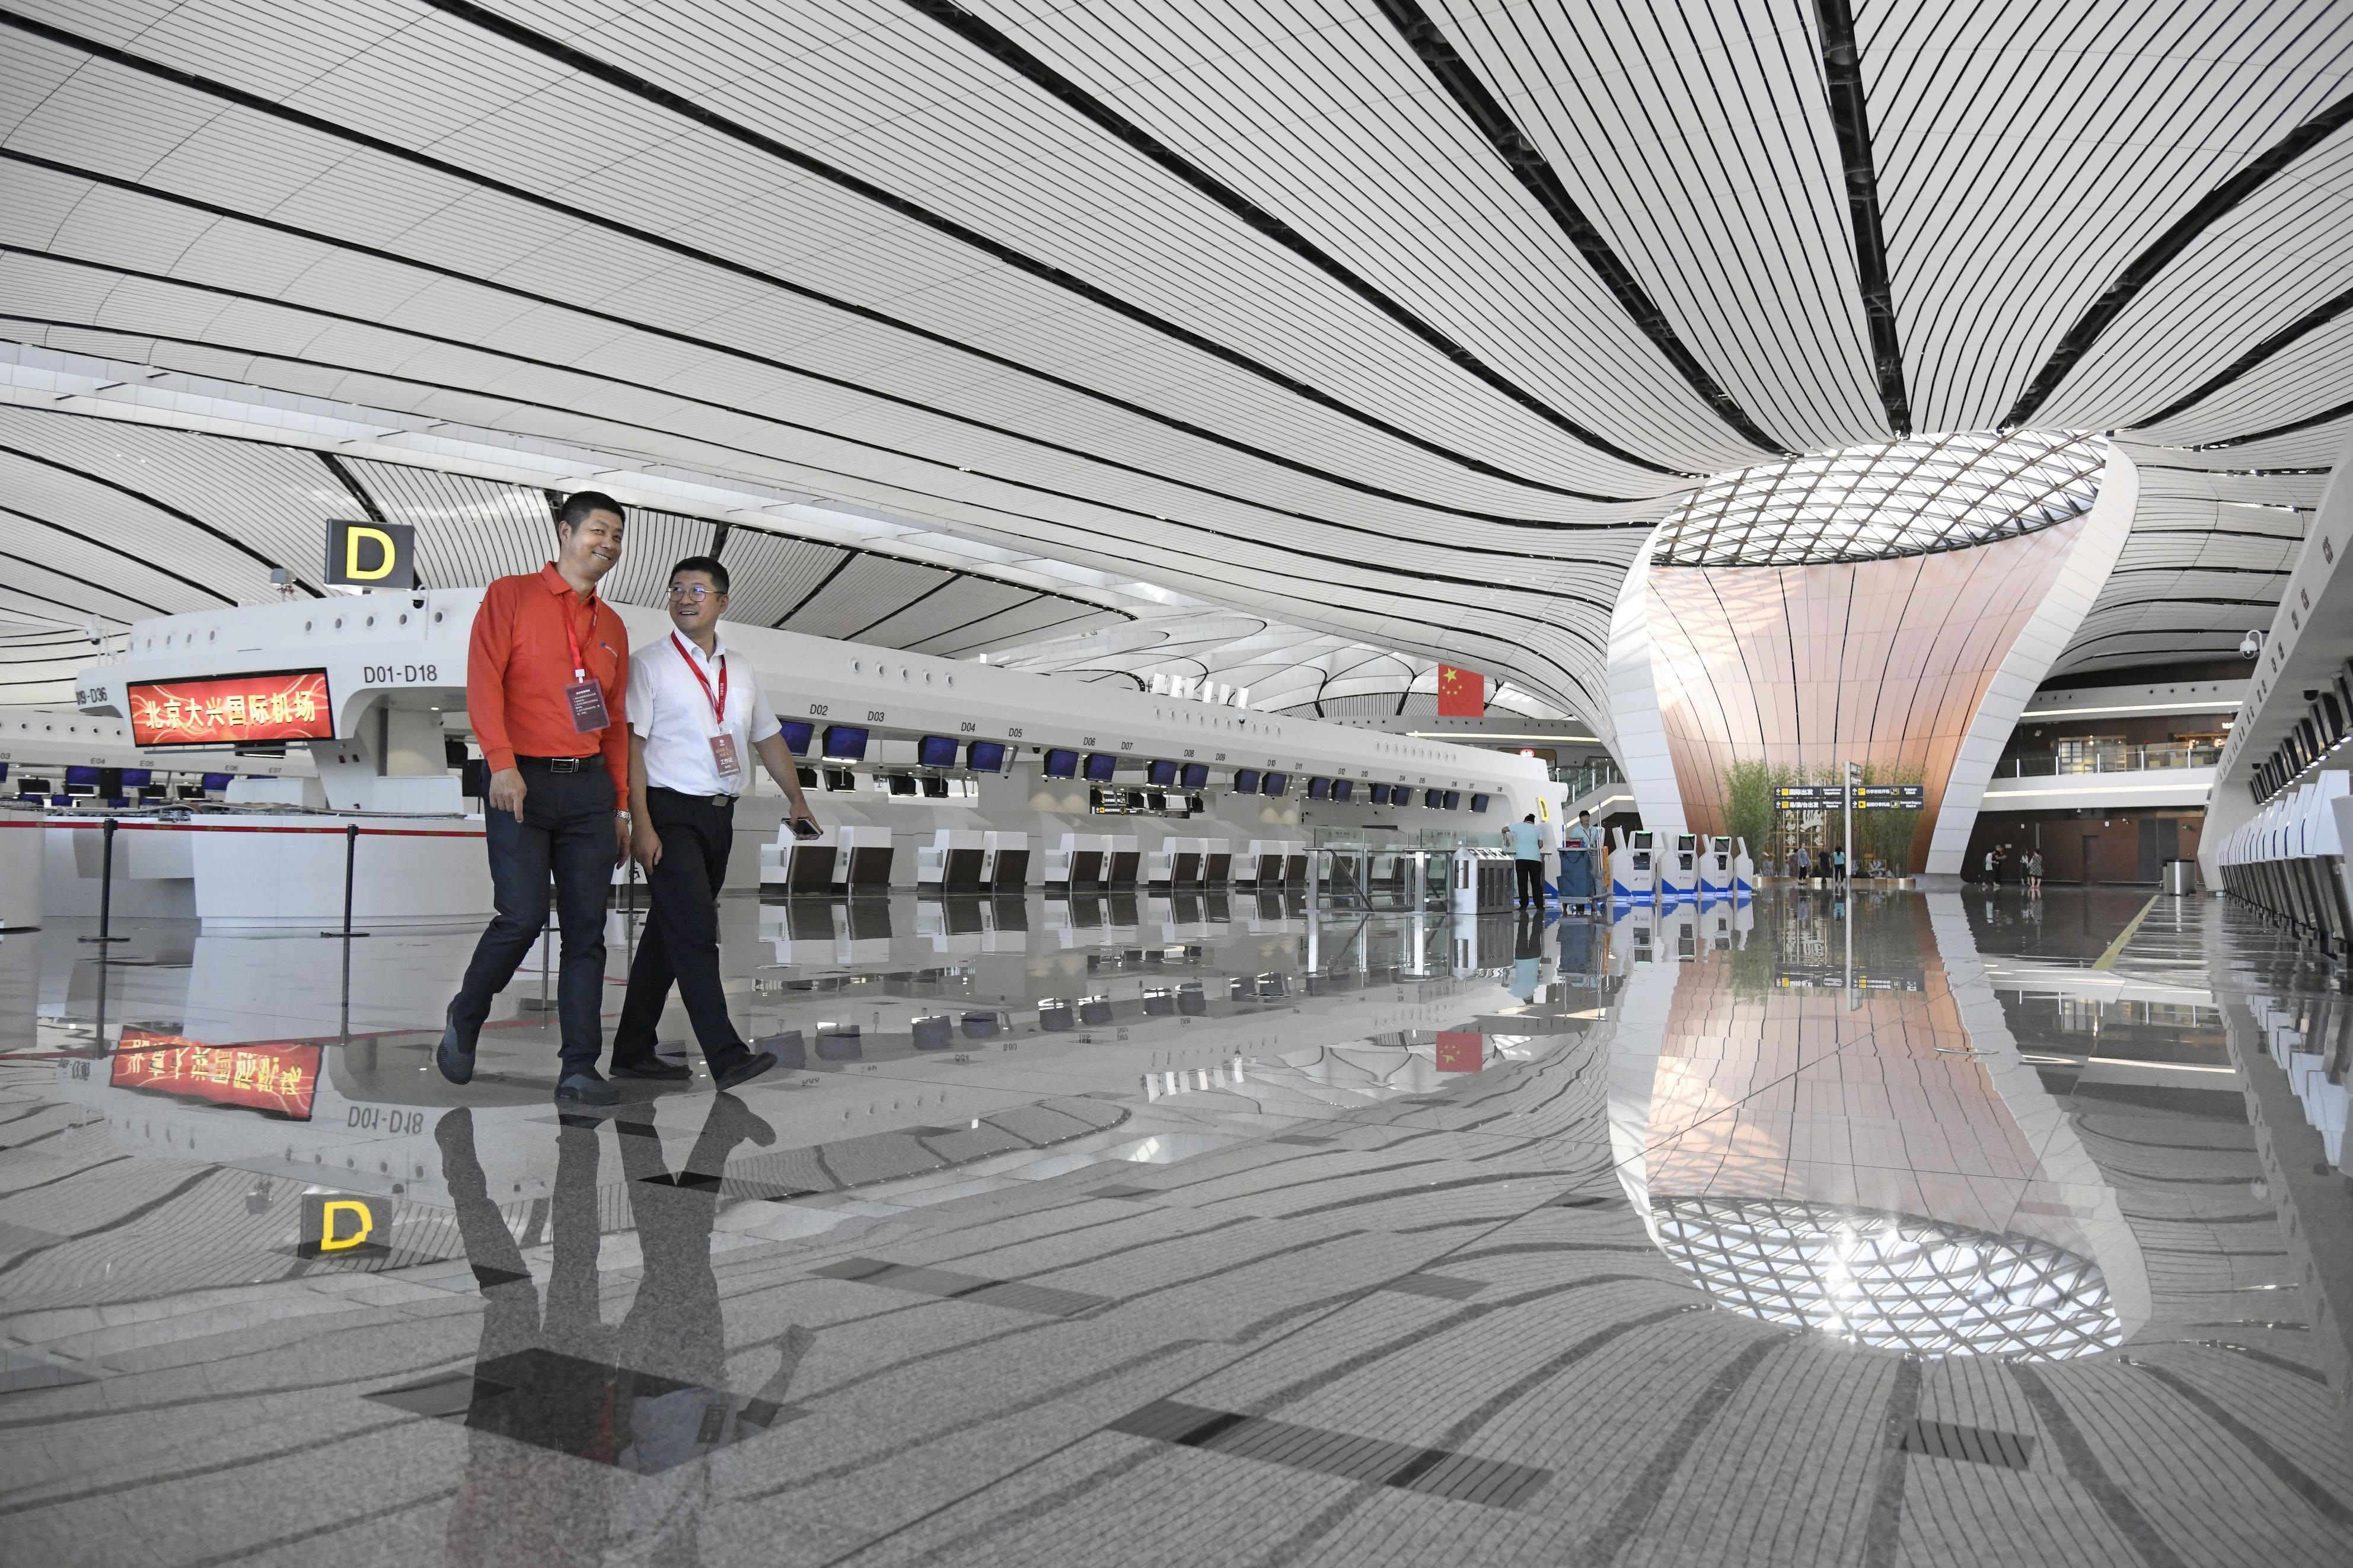 The departure lobby is seen at the new Daxing International Airport ahead of the 70th founding anniversary of the People's Republic of China in Beijing, China  Wednesday, Sept. 25, 2019.(Naohiko Hatta/Kyodo News via AP)